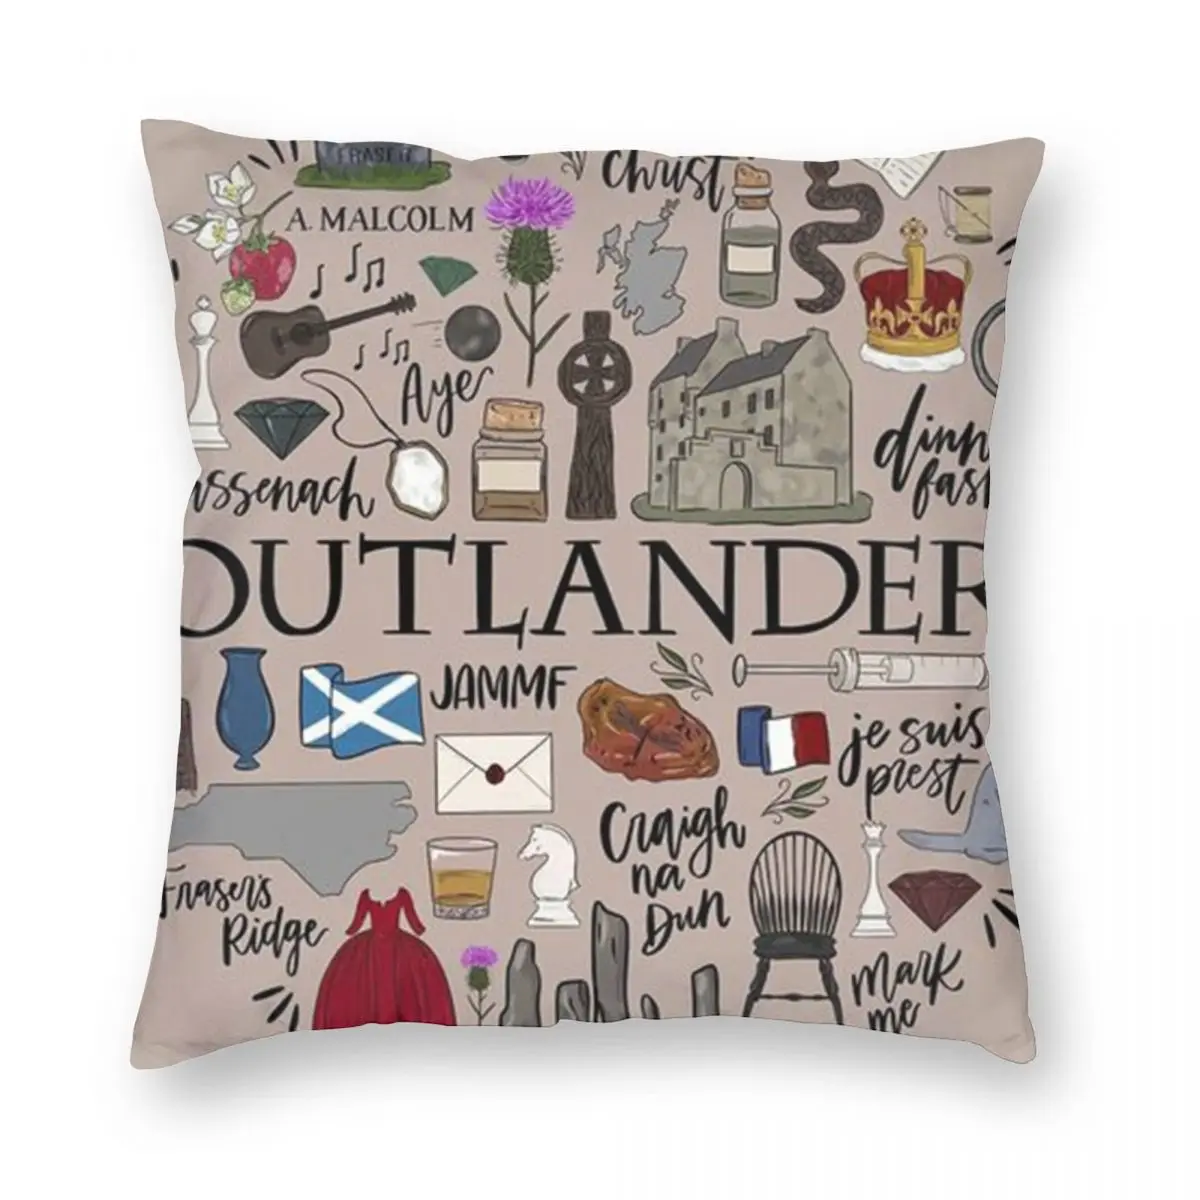 

Outlander In Typography Square Pillowcase Polyester Linen Velvet Printed Zip Decorative Pillow Case Bed Cushion Cover Wholesale